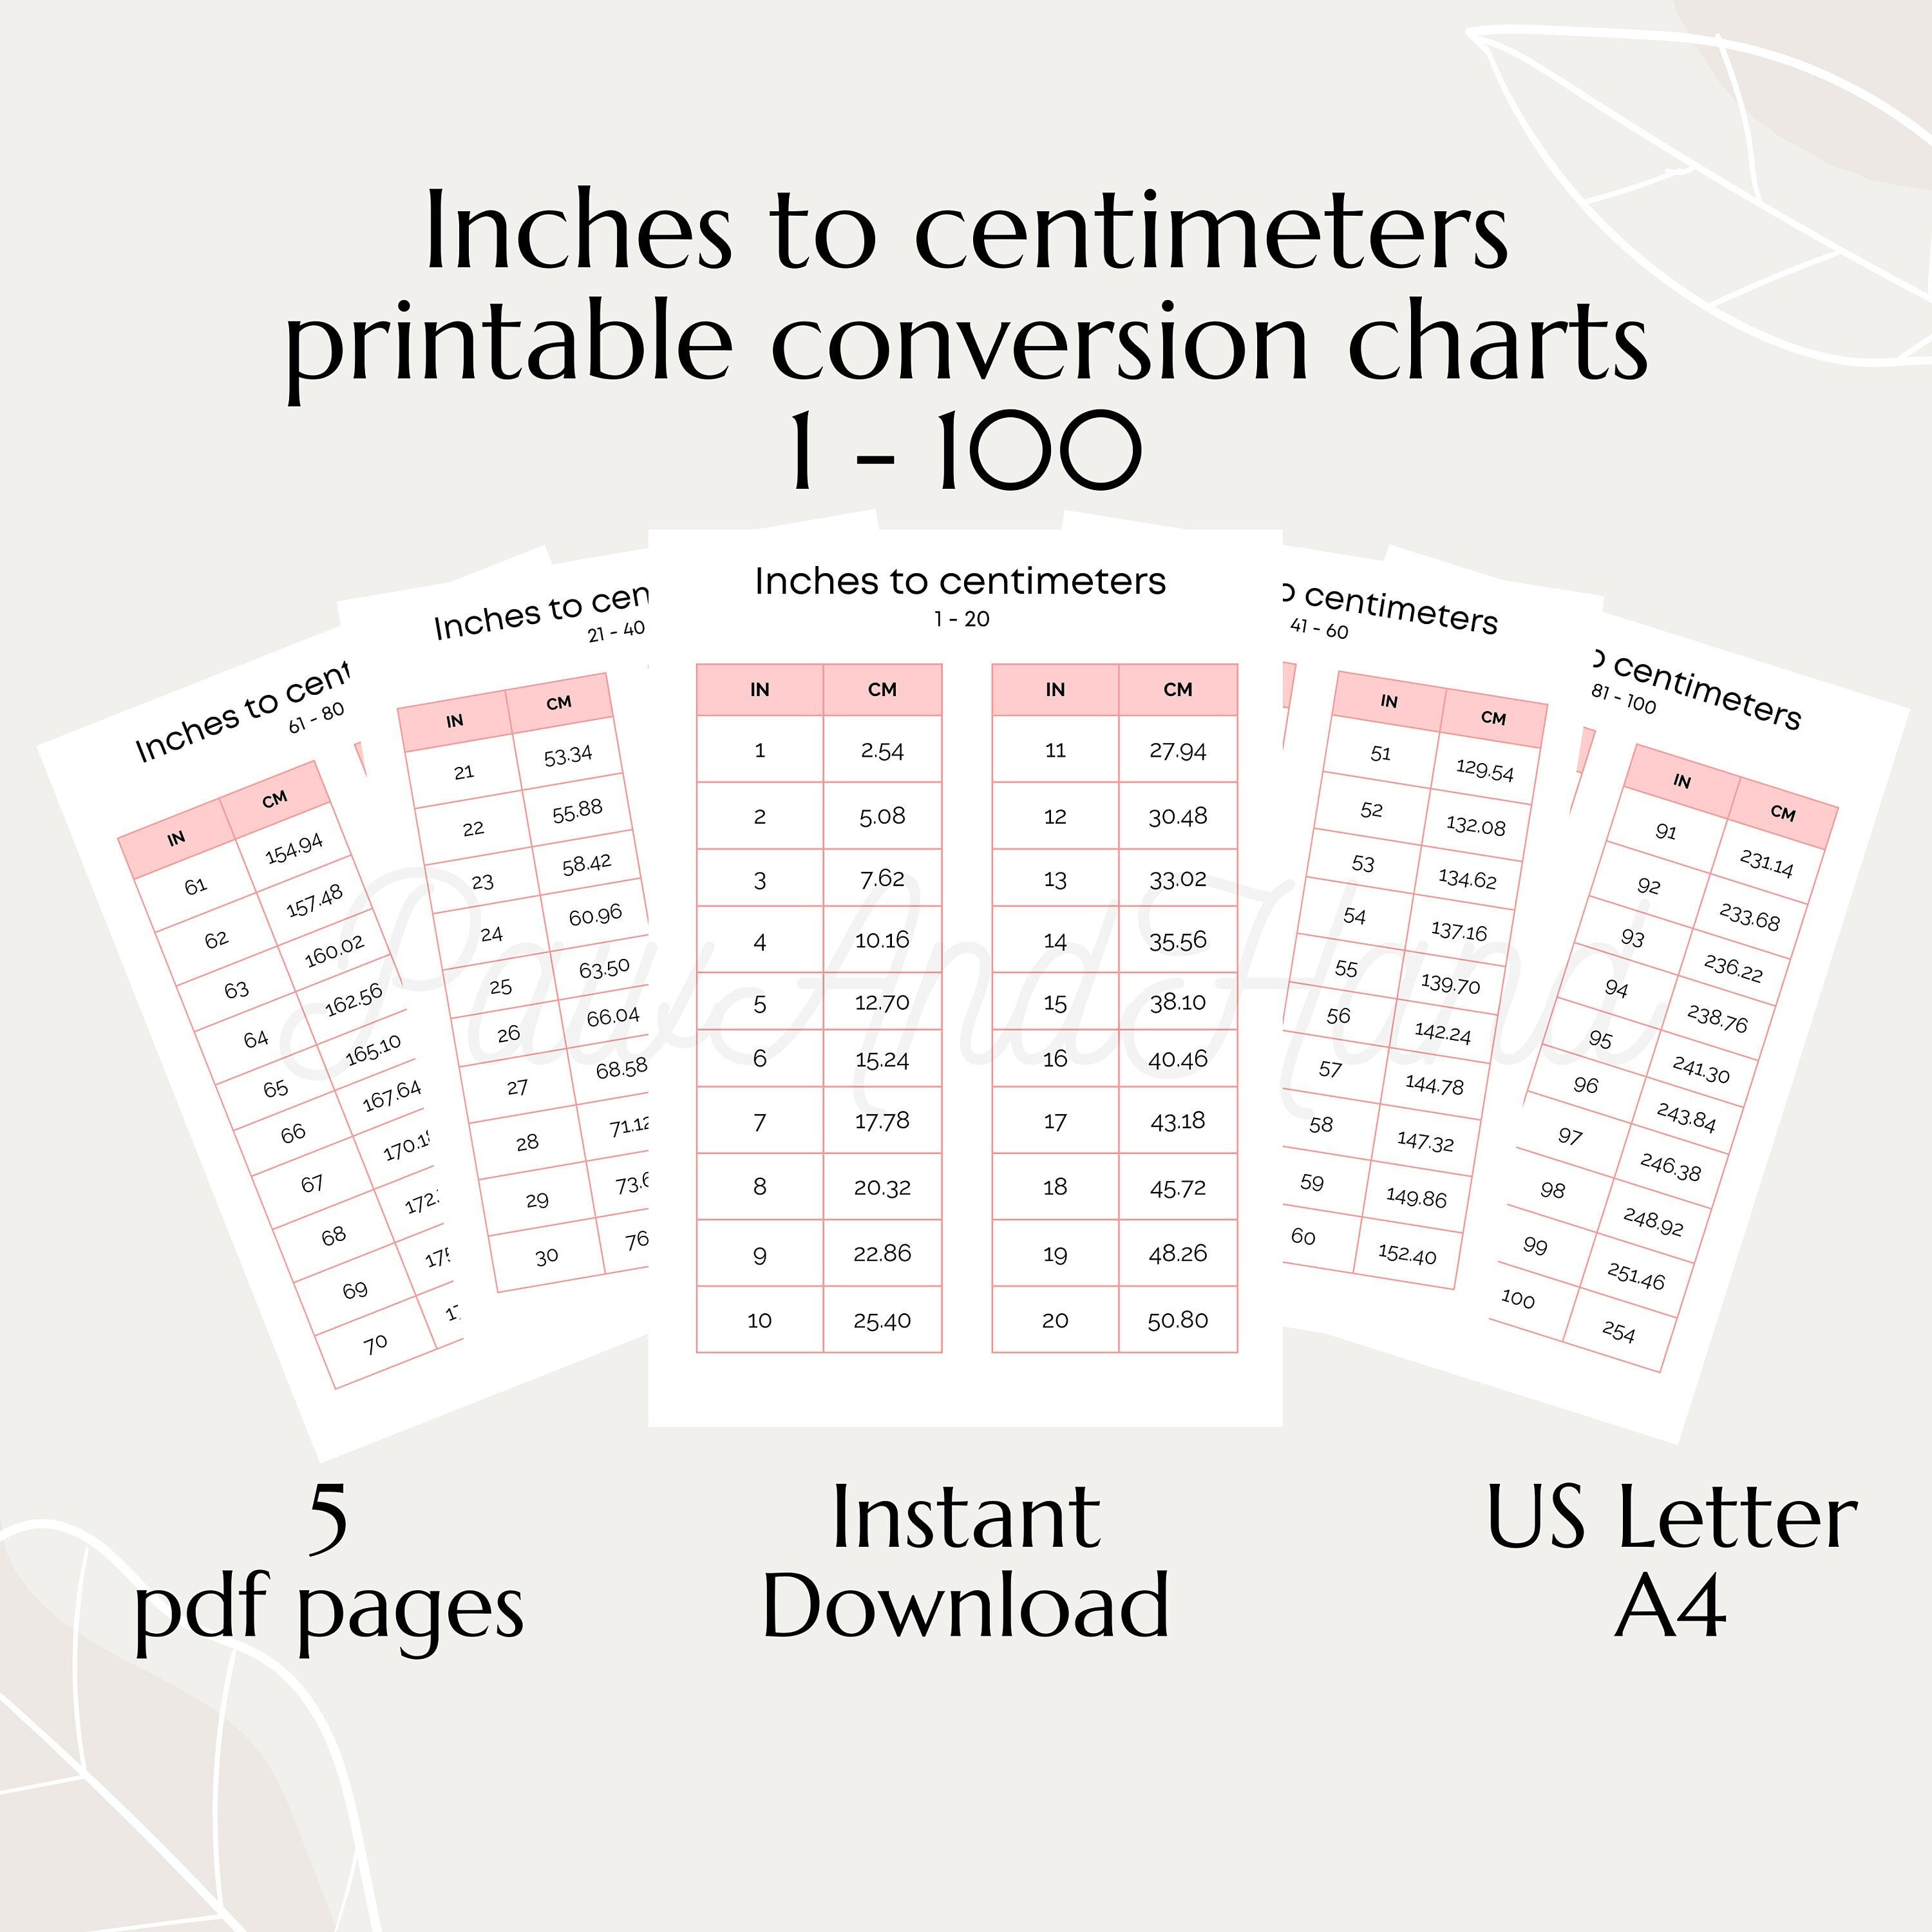 cm to inches conversion chart fractions - Google Search  Cm to inches  conversion, Life hacks for school, Metric conversion chart